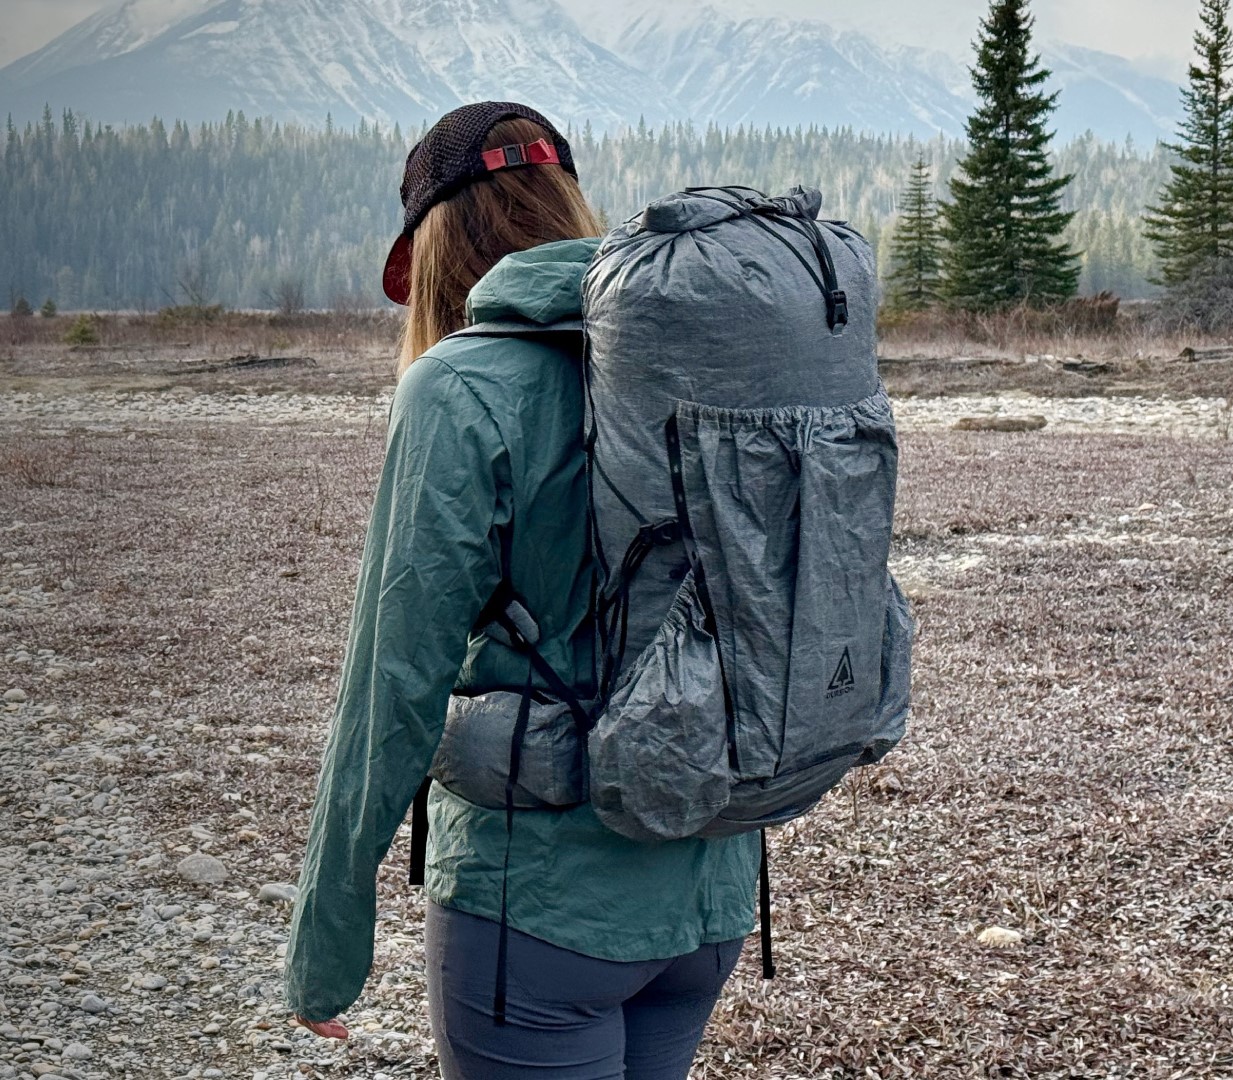 Reinforced Plastics - Aluula collaborates with outdoor brands Arc’teryx ...